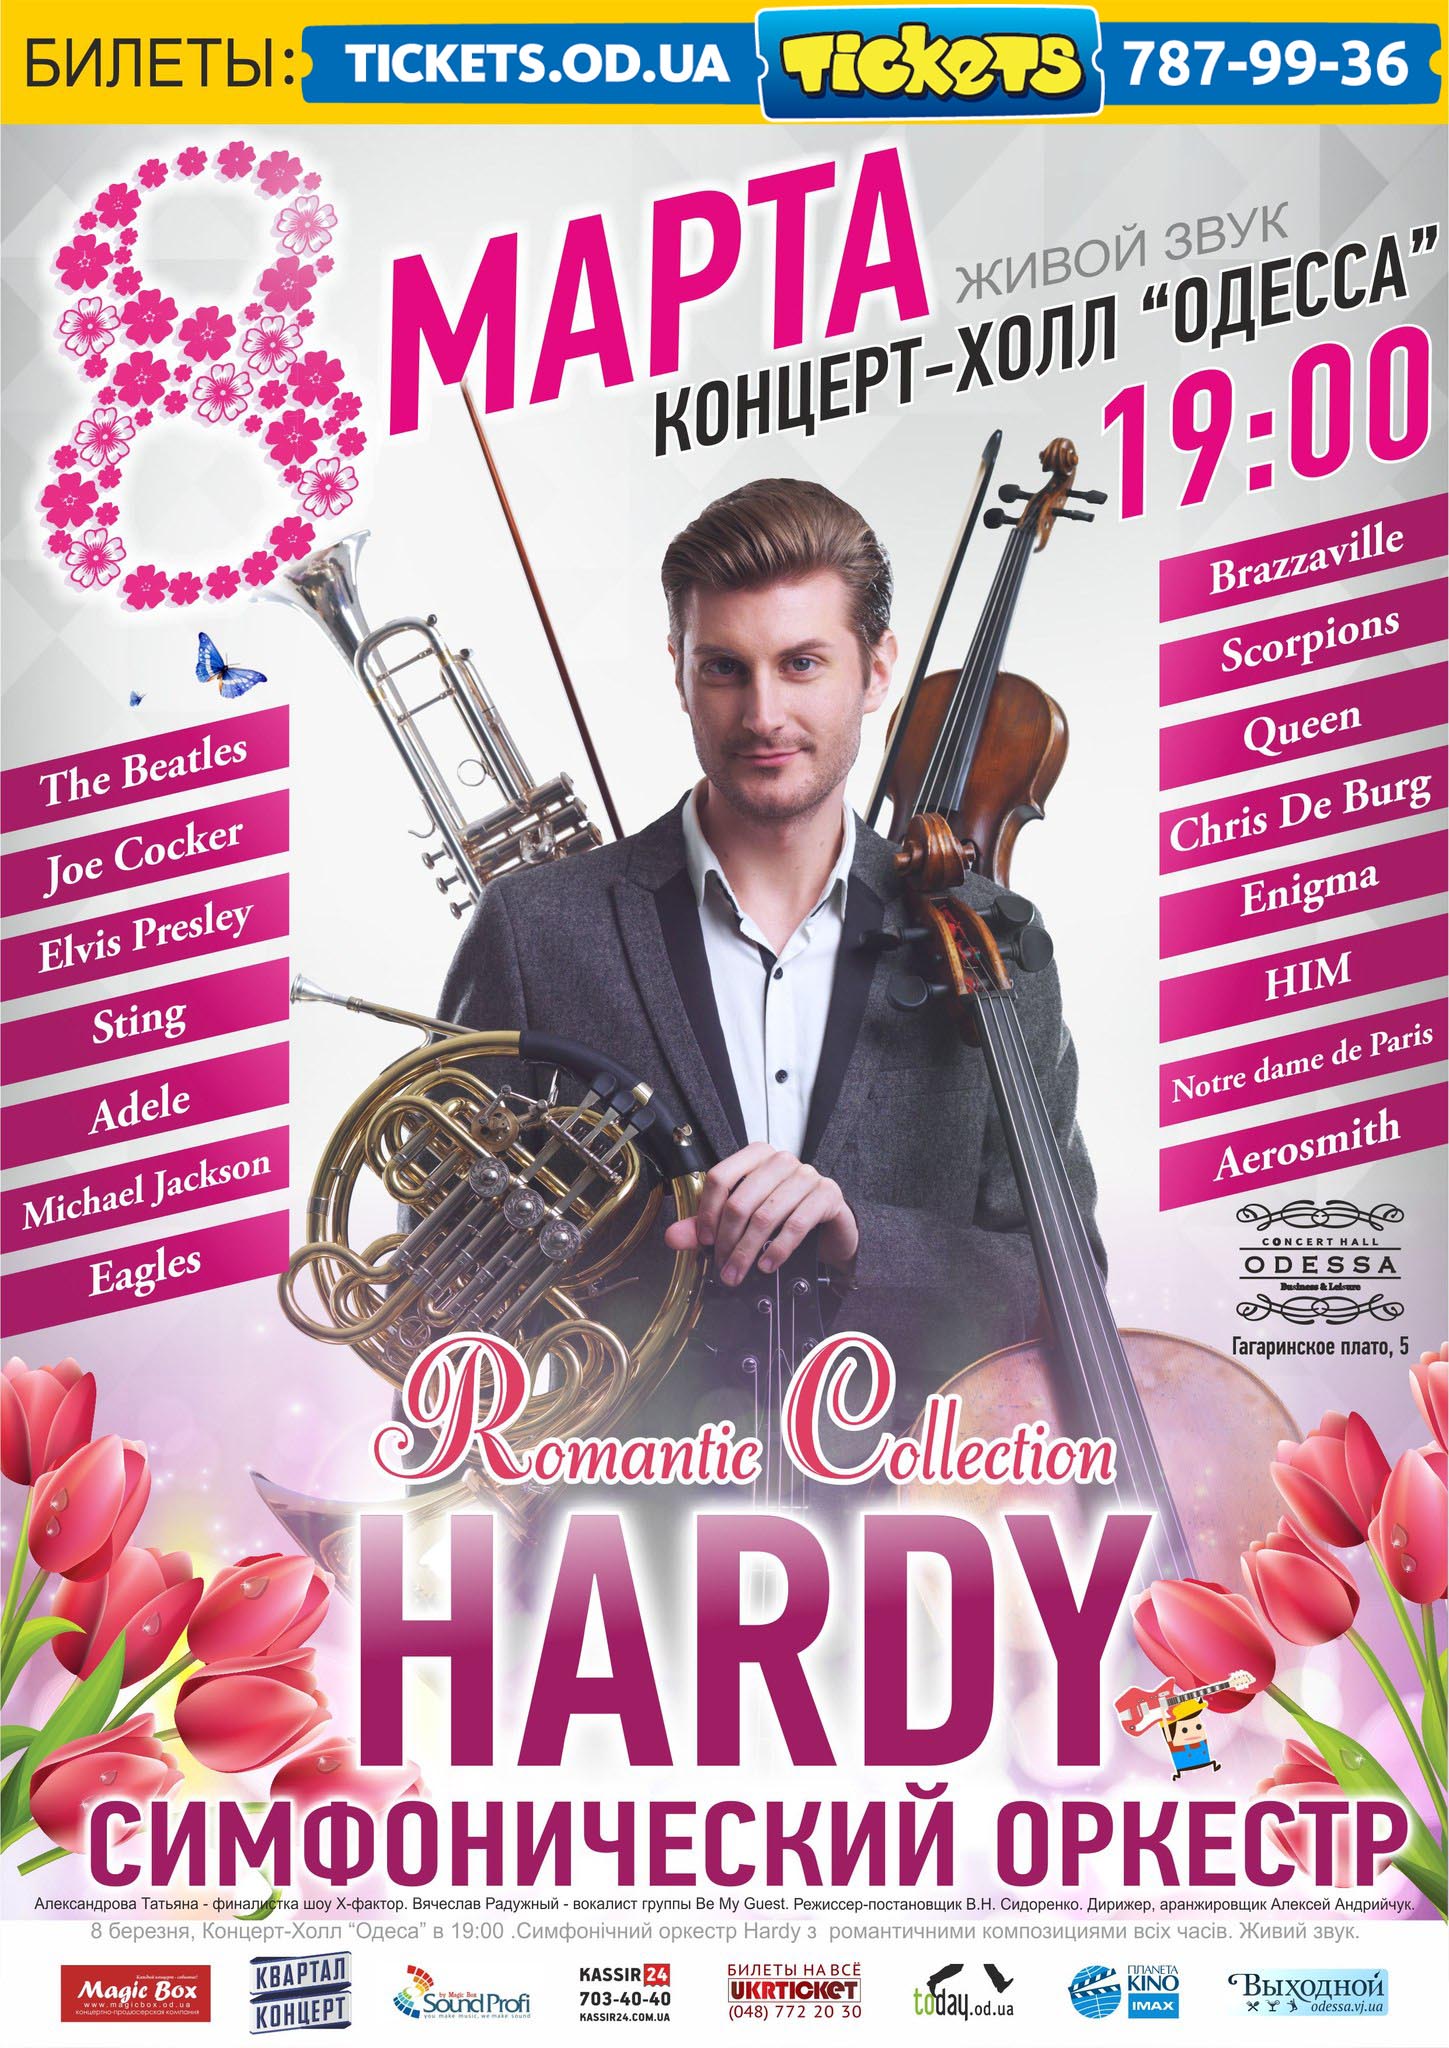 Hardy Orchestra 